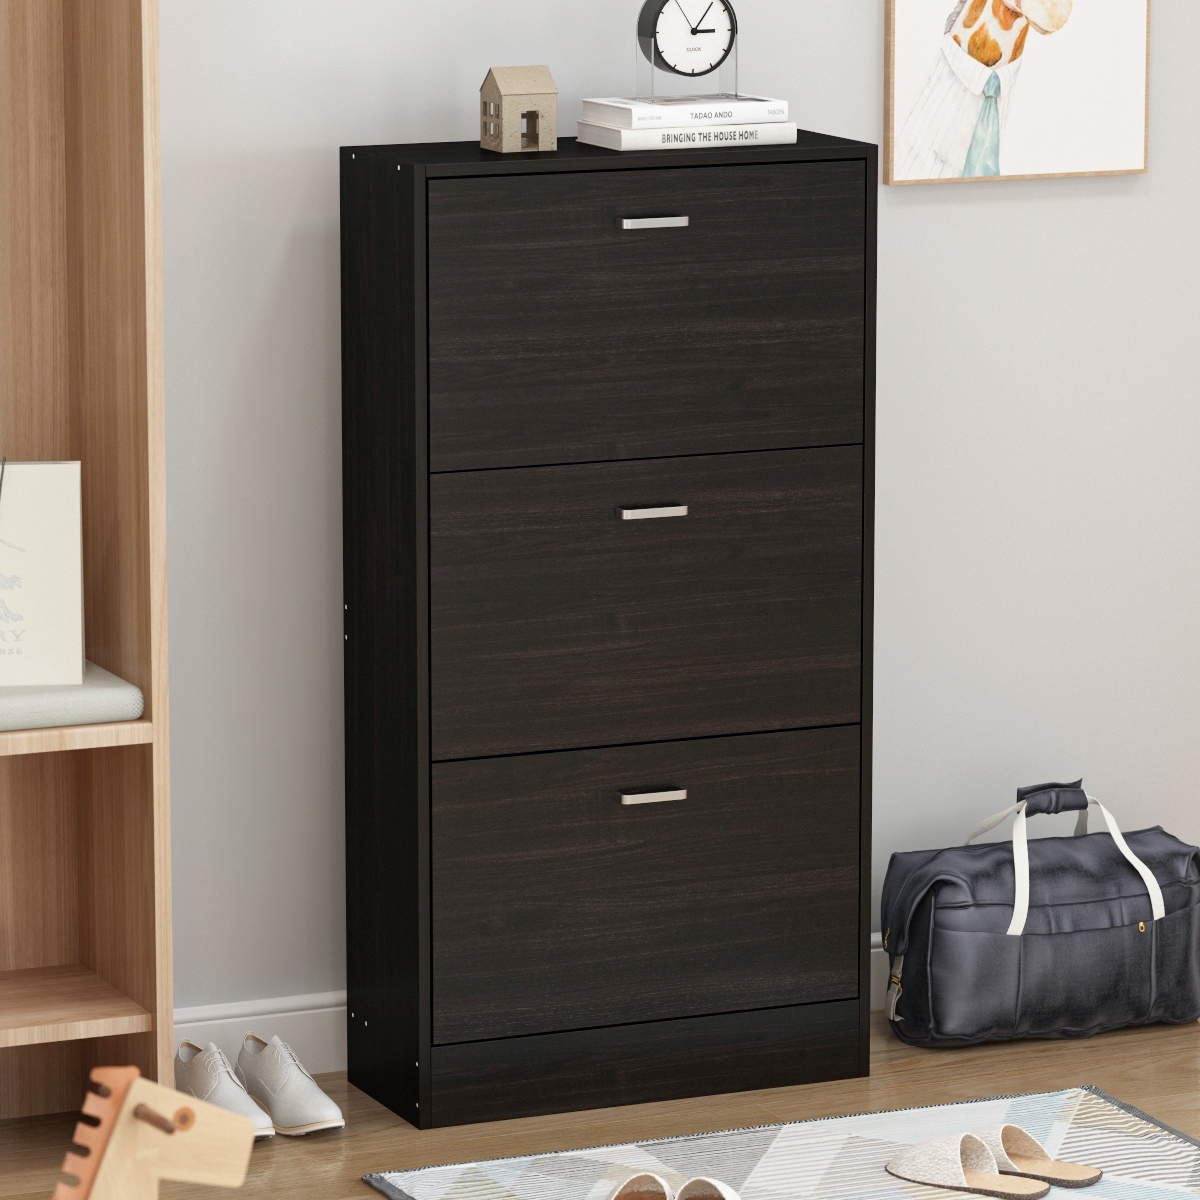 https://ak1.ostkcdn.com/images/products/is/images/direct/c198cfd4c7532770cdb494aa375bff66a07811fe/FAMAPY-Black-3-Drawer-Shoe-Cabinet-with-6-Tier-Rack-%28Up-to-18-Pairs%29.jpg